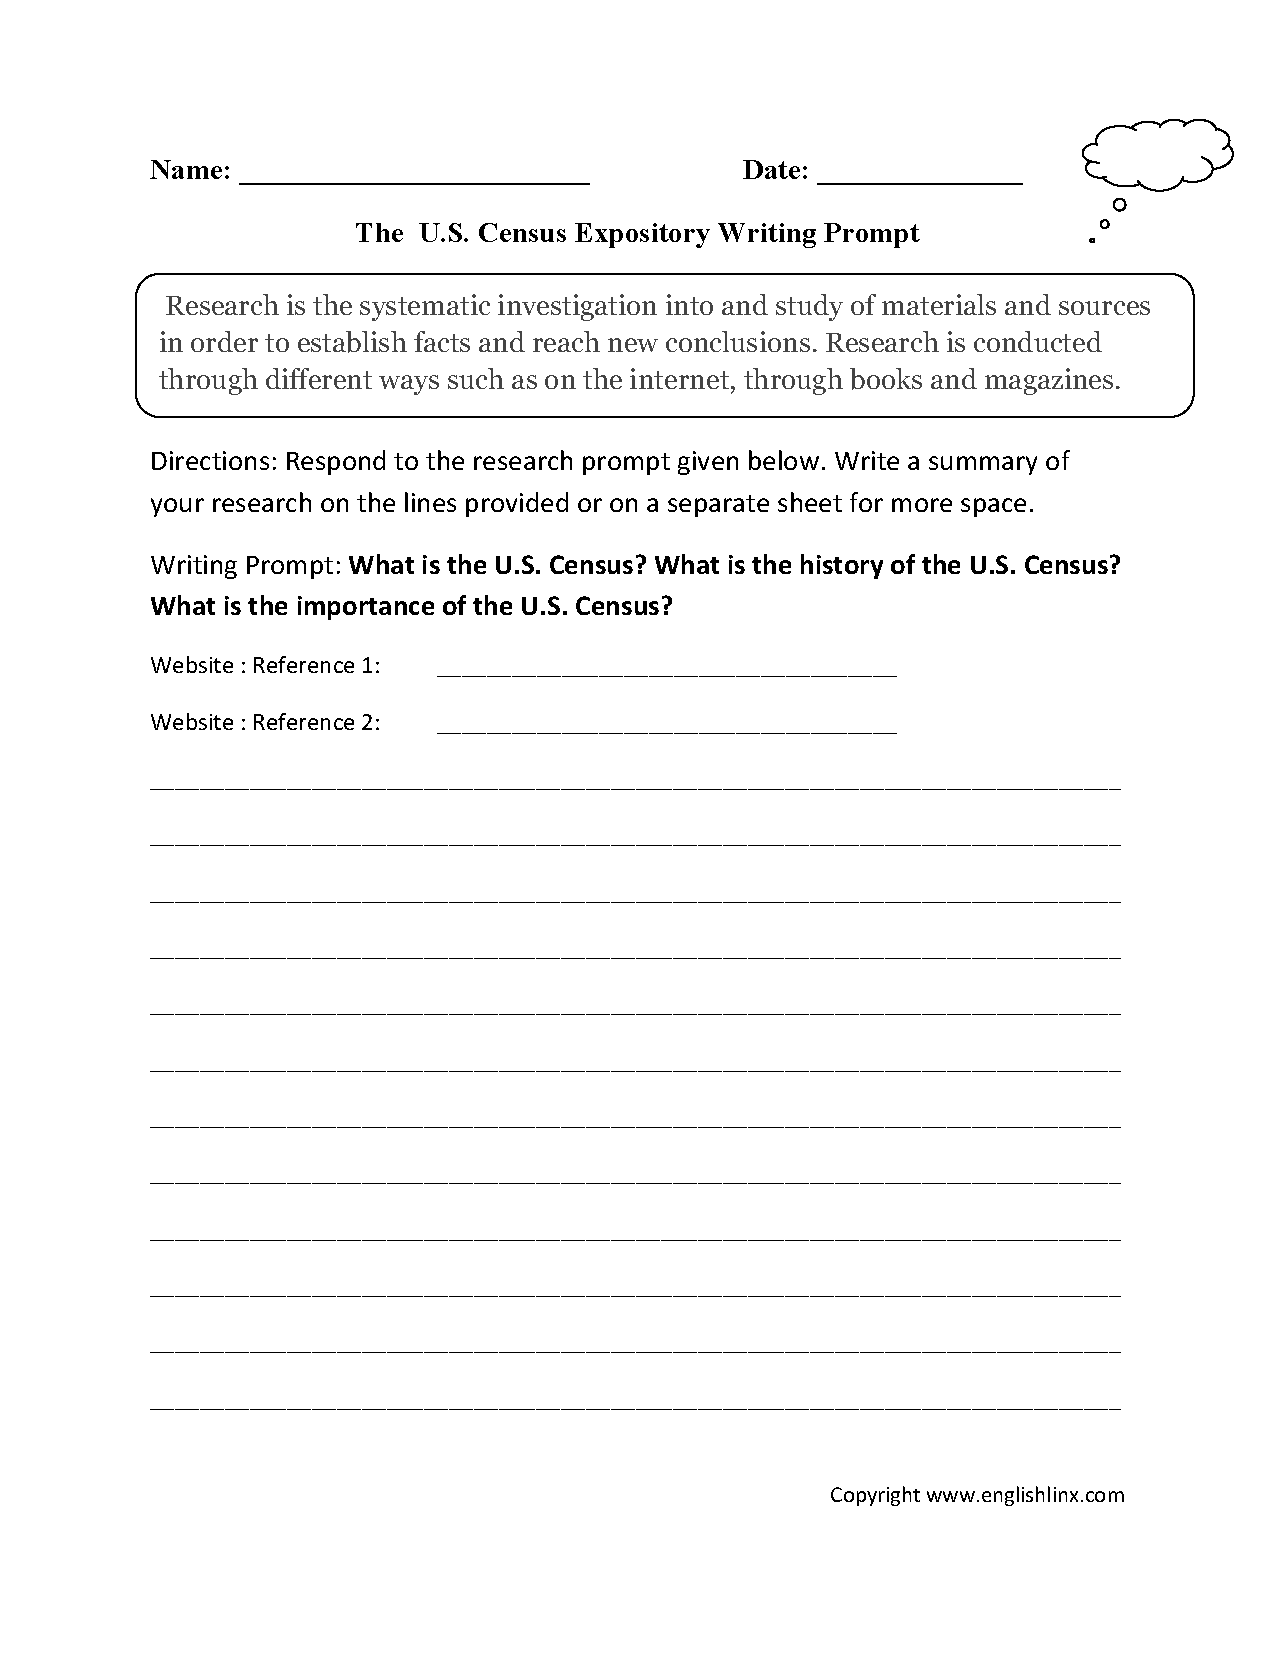 The US Census Expository and Research Writing Prompts Worksheets